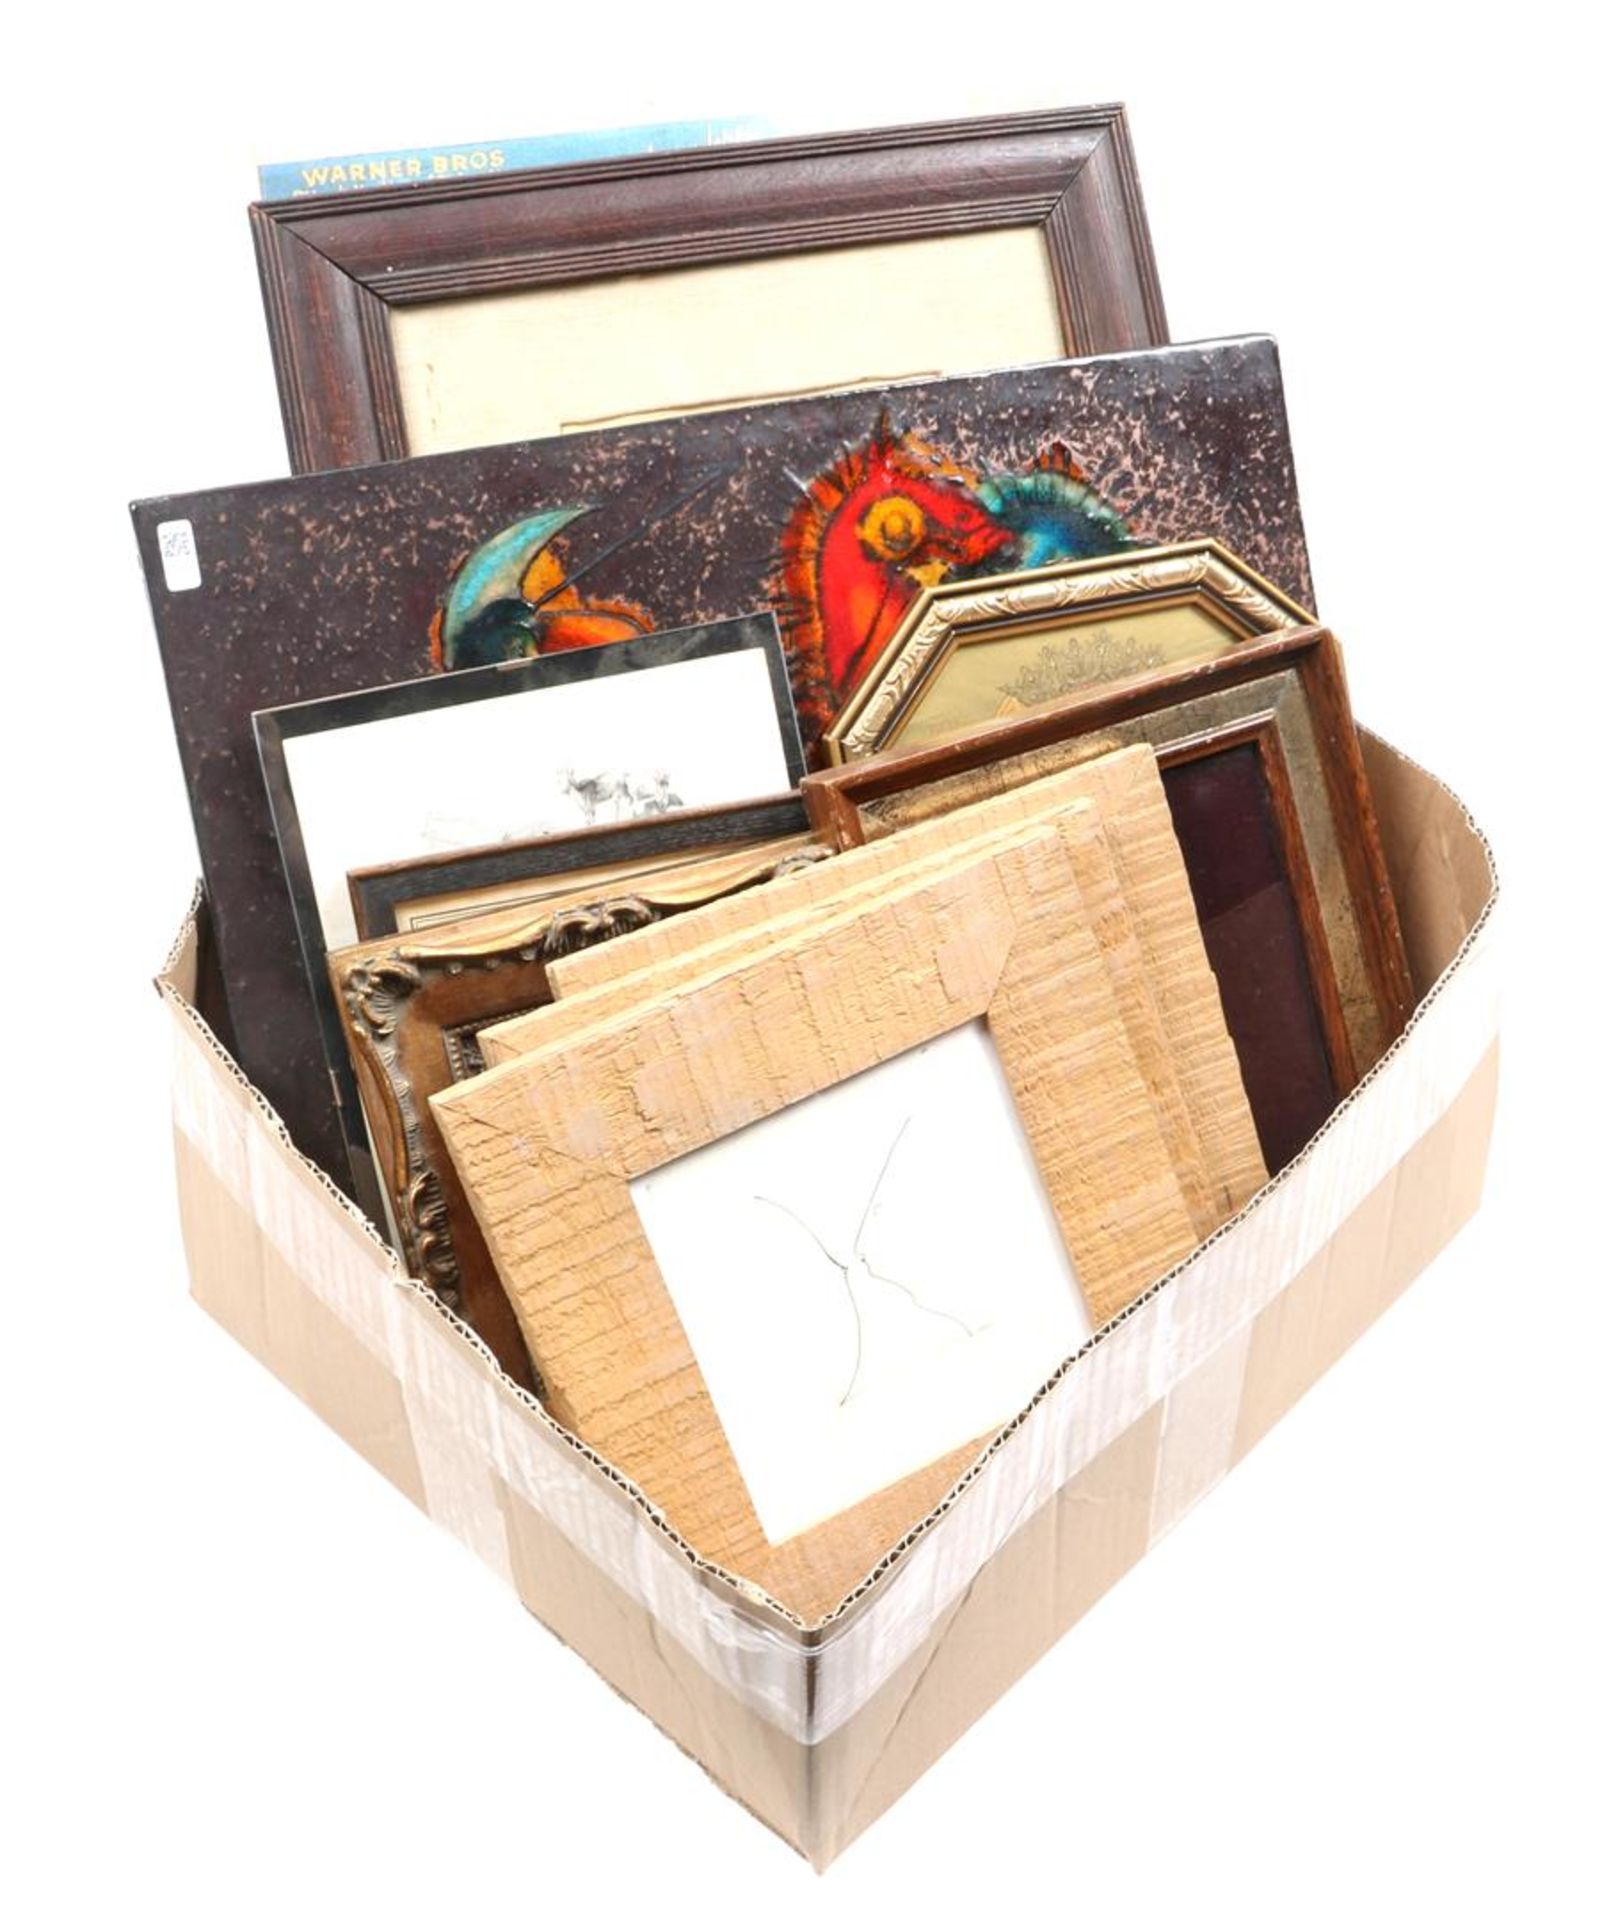 Box with various wall decorations including 3 works by Philip Boas, ceramic tile, drawing and